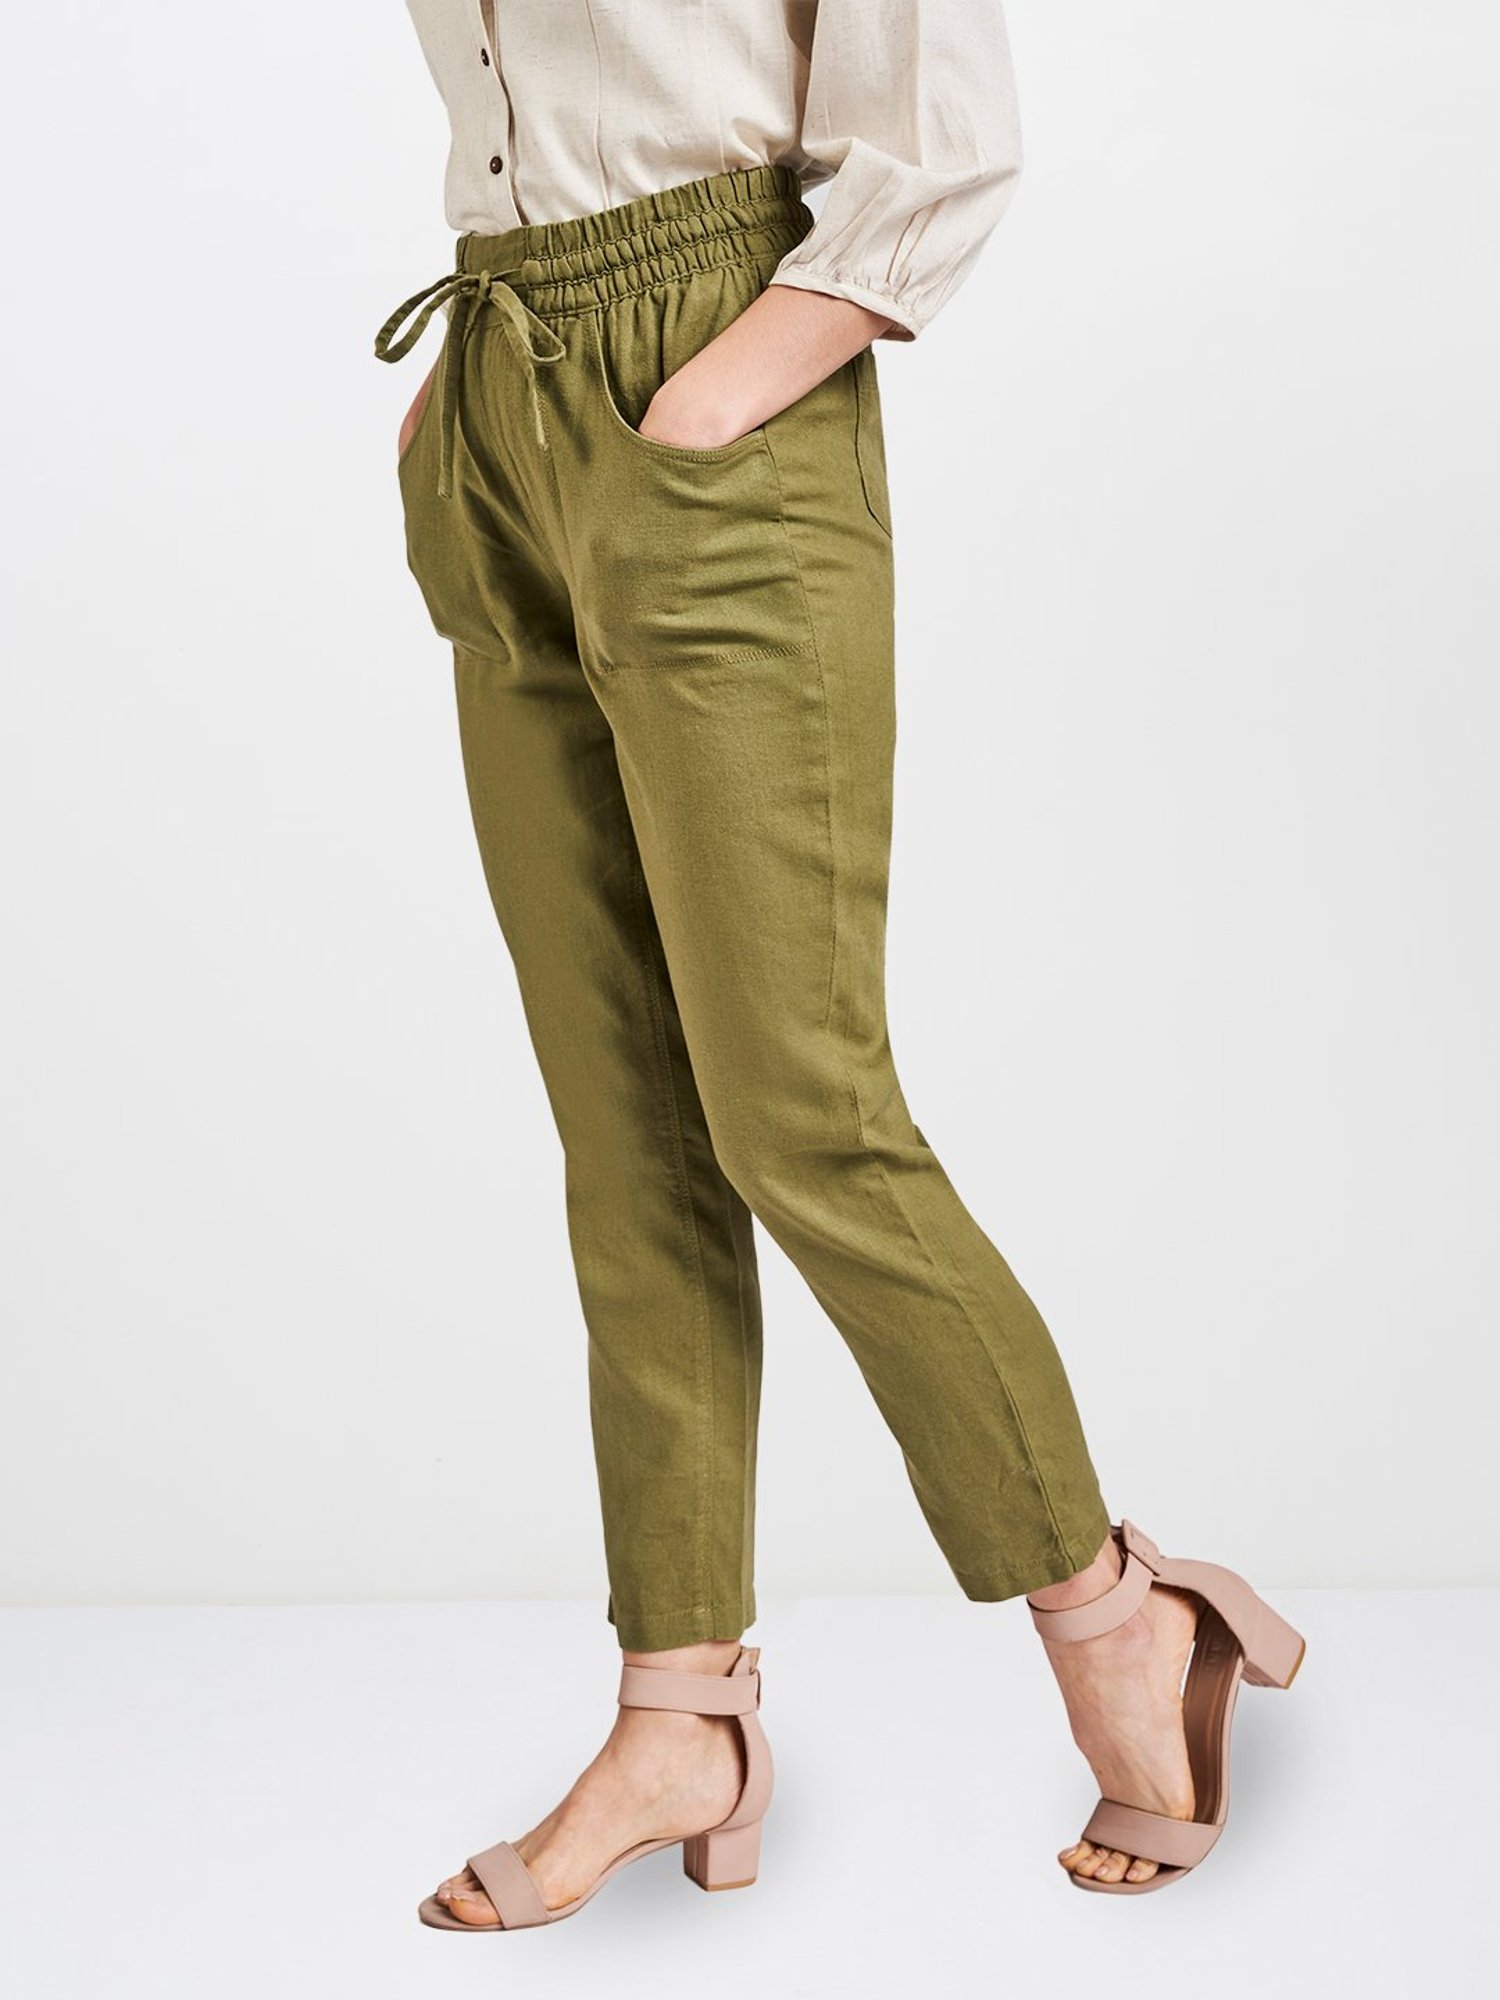 EbIve Lifestyle Clothing  Studio Relaxed Linen Pant Khaki  FOX AND SCOUT